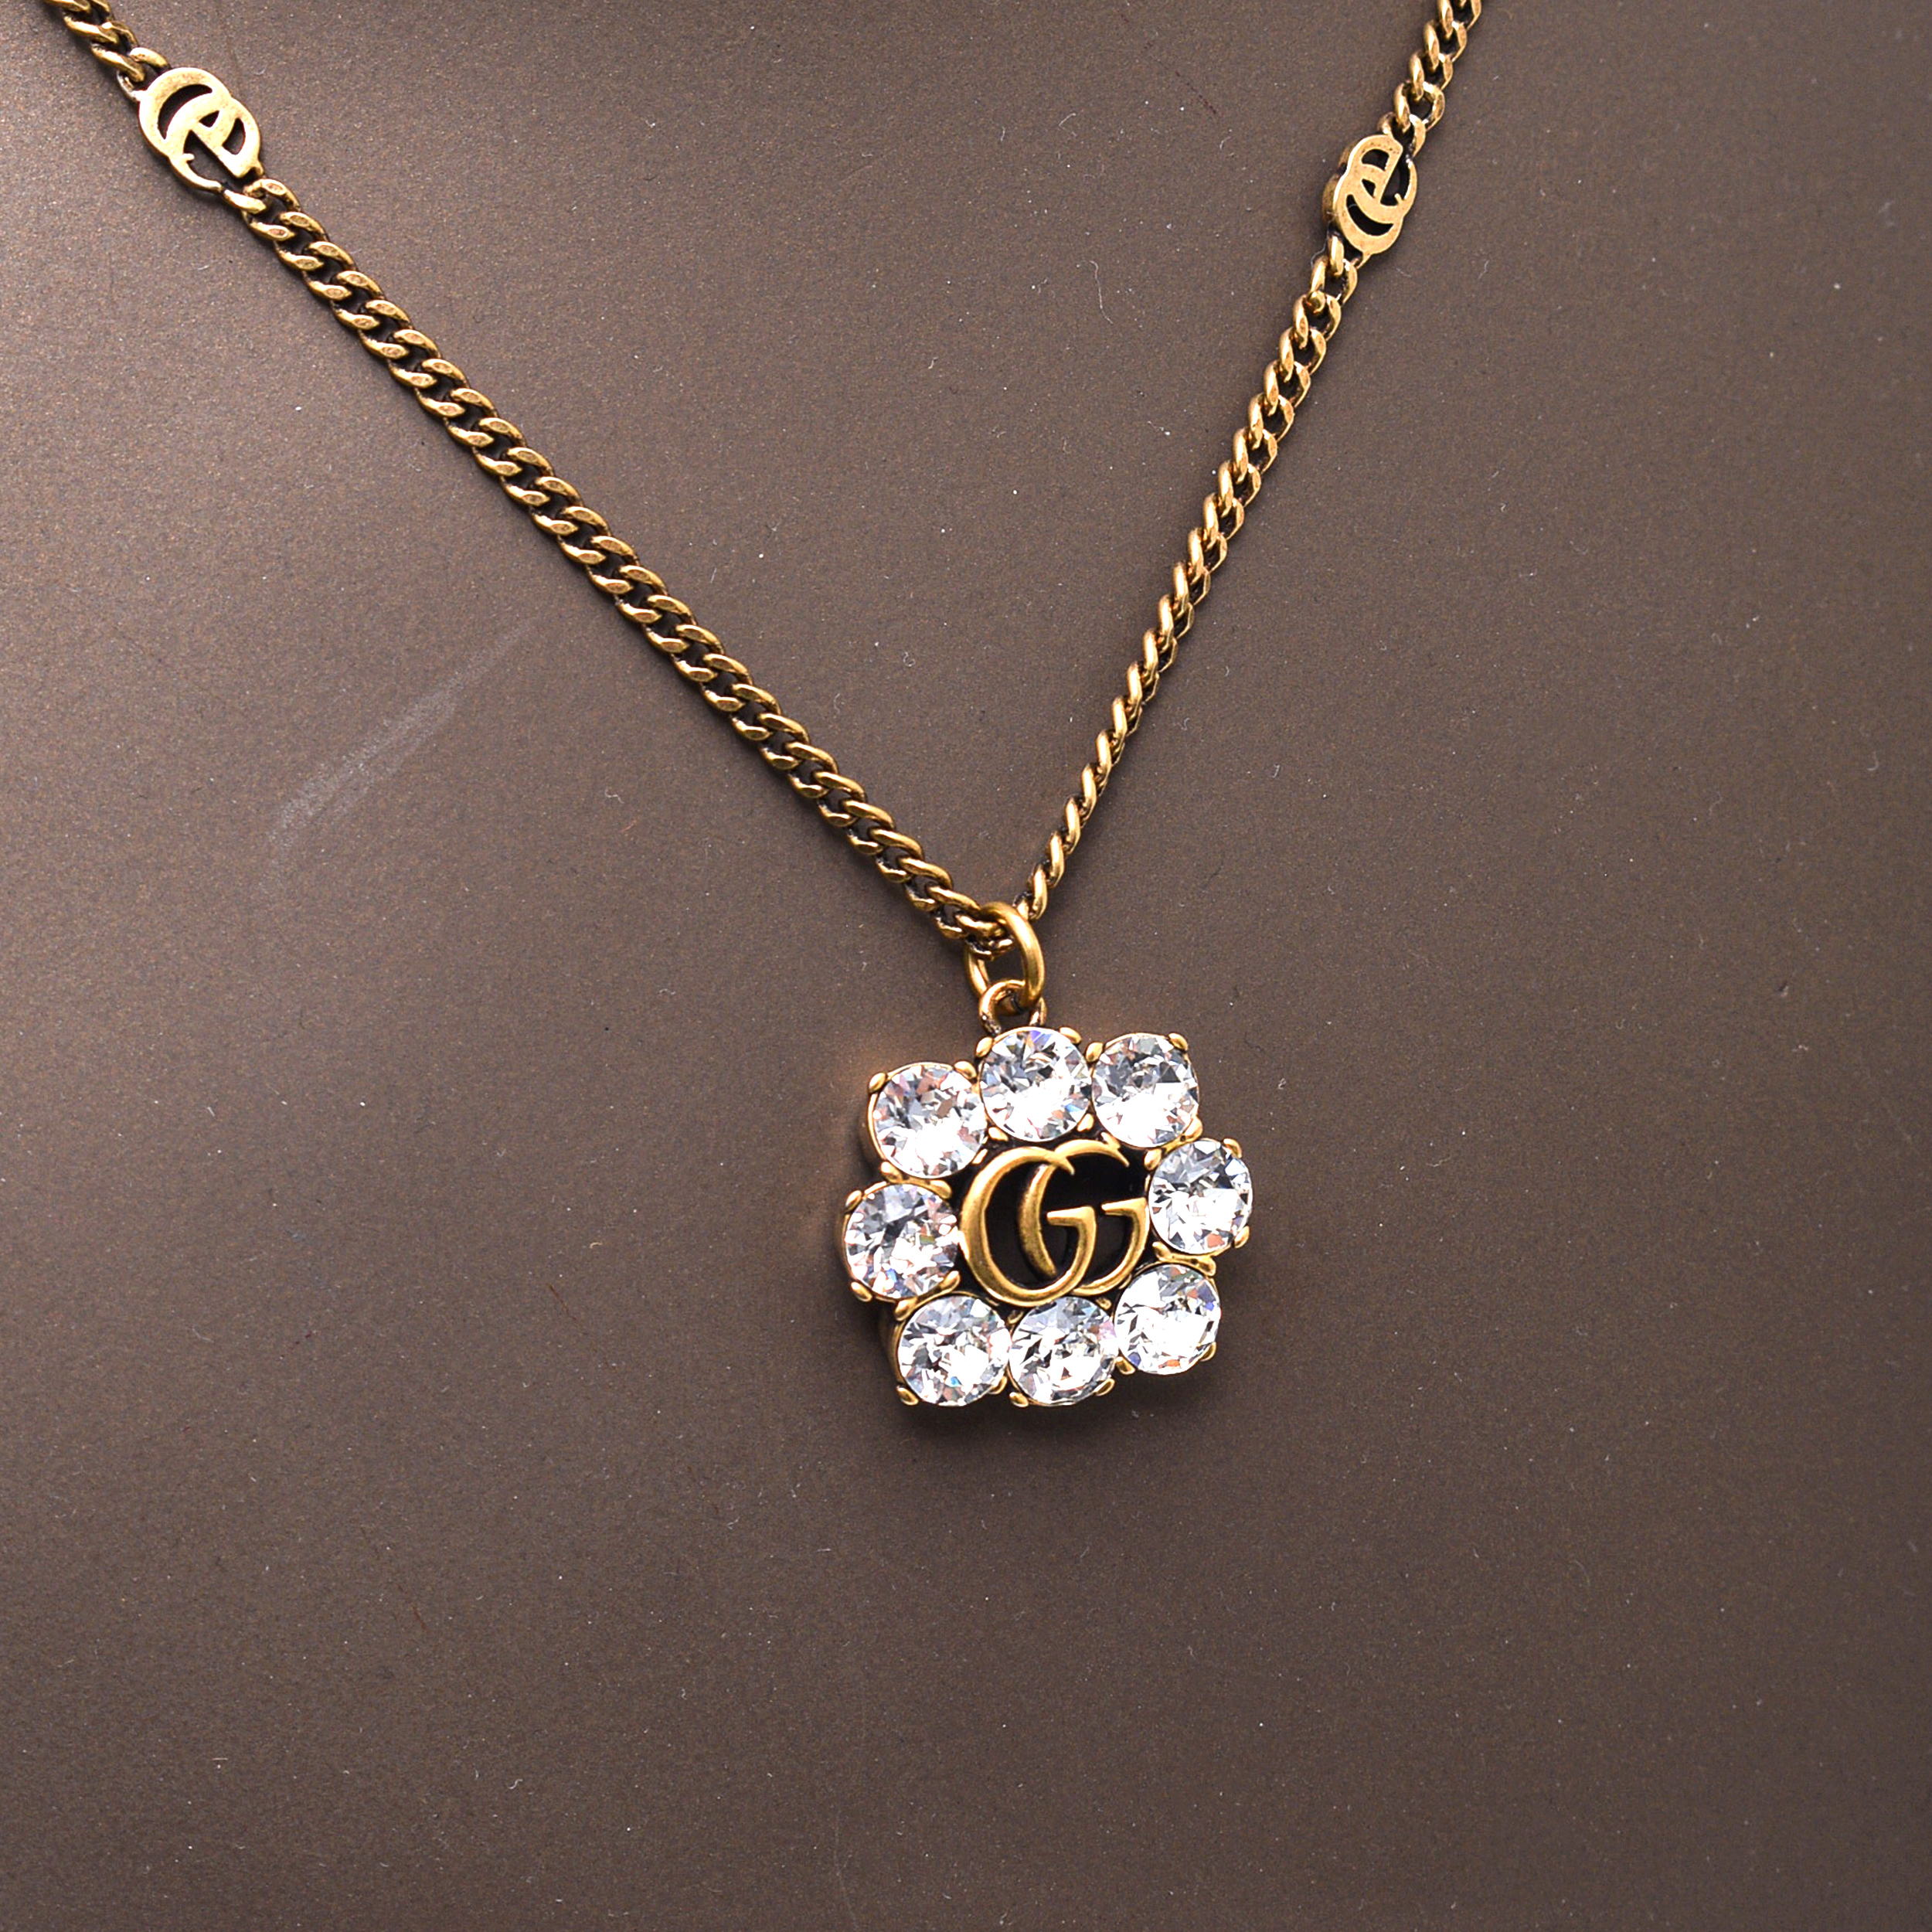 GUCCİ - Crystal Double G Necklace  in Aged Gold Metal